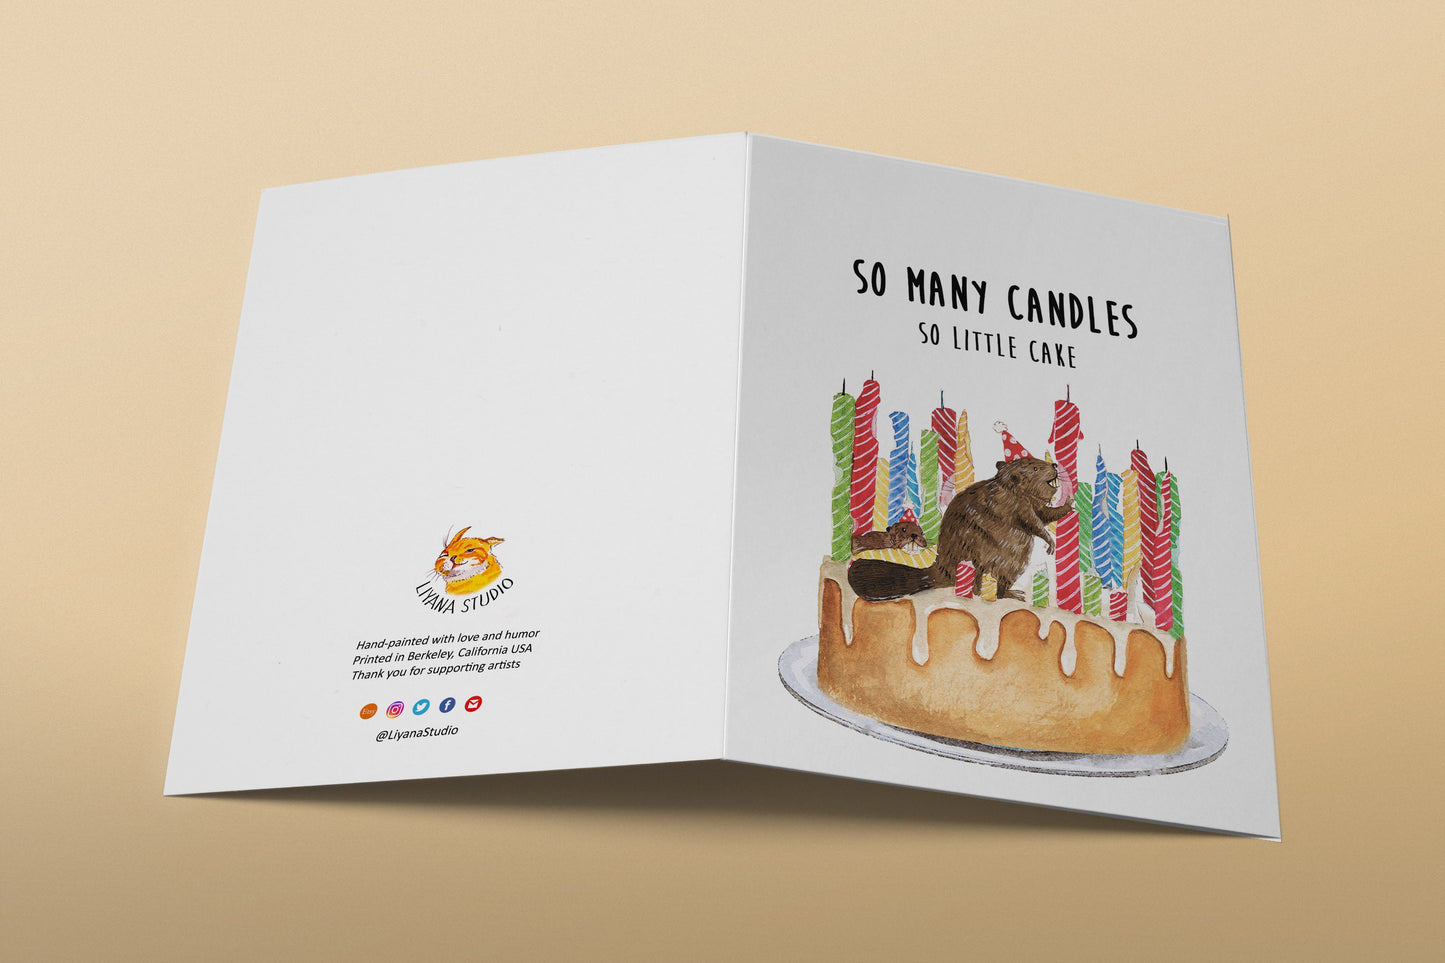 Damn So Many Candles So Little Cake Funny Beaver Birthday Card For Dad, Getting Old Birthday Cards For Best Friend, 40th 50th Birthday Cake